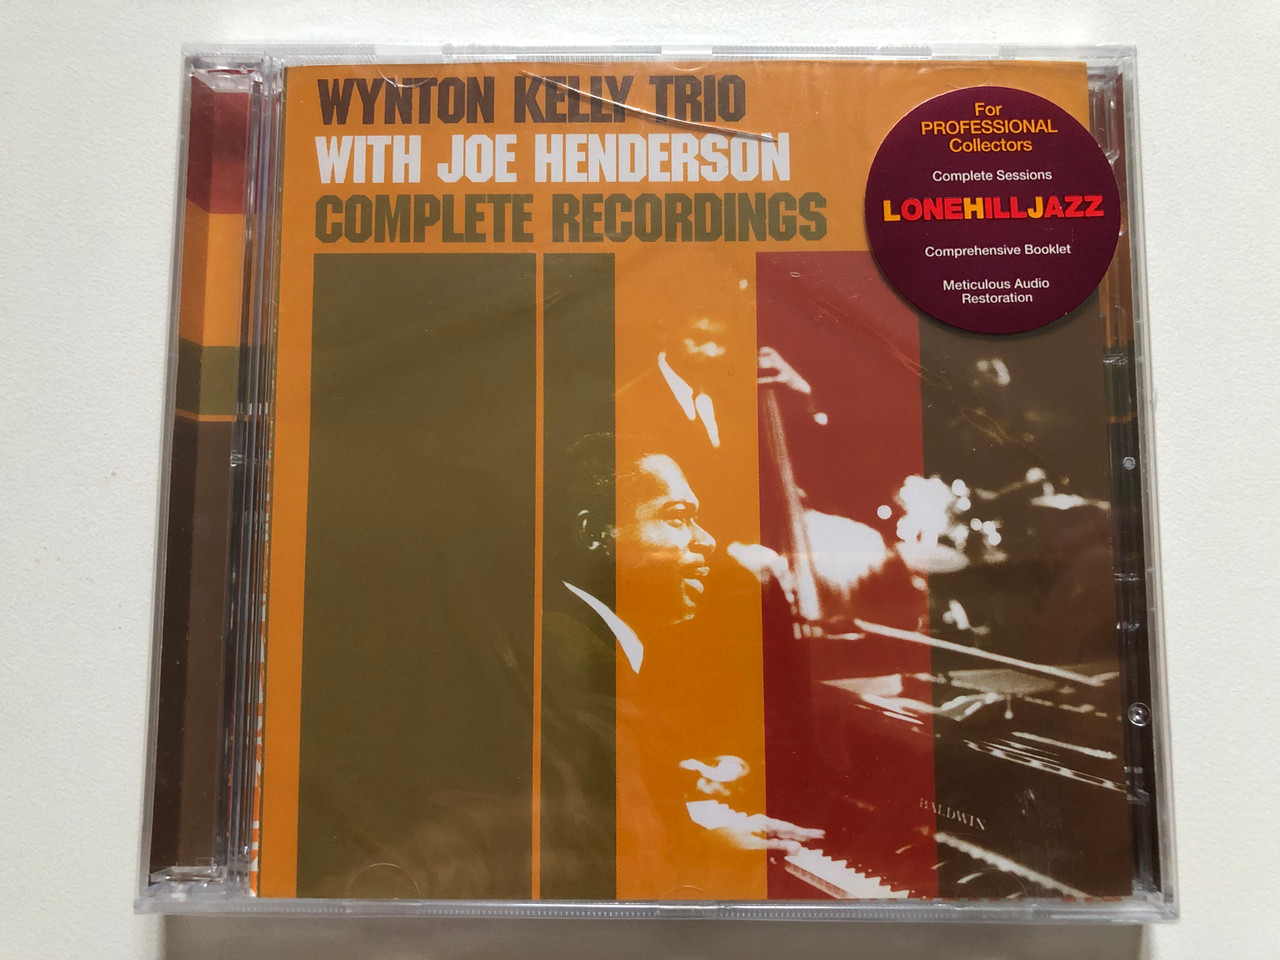 https://cdn10.bigcommerce.com/s-62bdpkt7pb/products/0/images/310559/Wynton_Kelly_Trio_With_Joe_Henderson_Complete_Recordings_Lone_Hill_Jazz_2x_Audio_CD_2004_LHJ10142_1__07310.1699386816.1280.1280.JPG?c=2